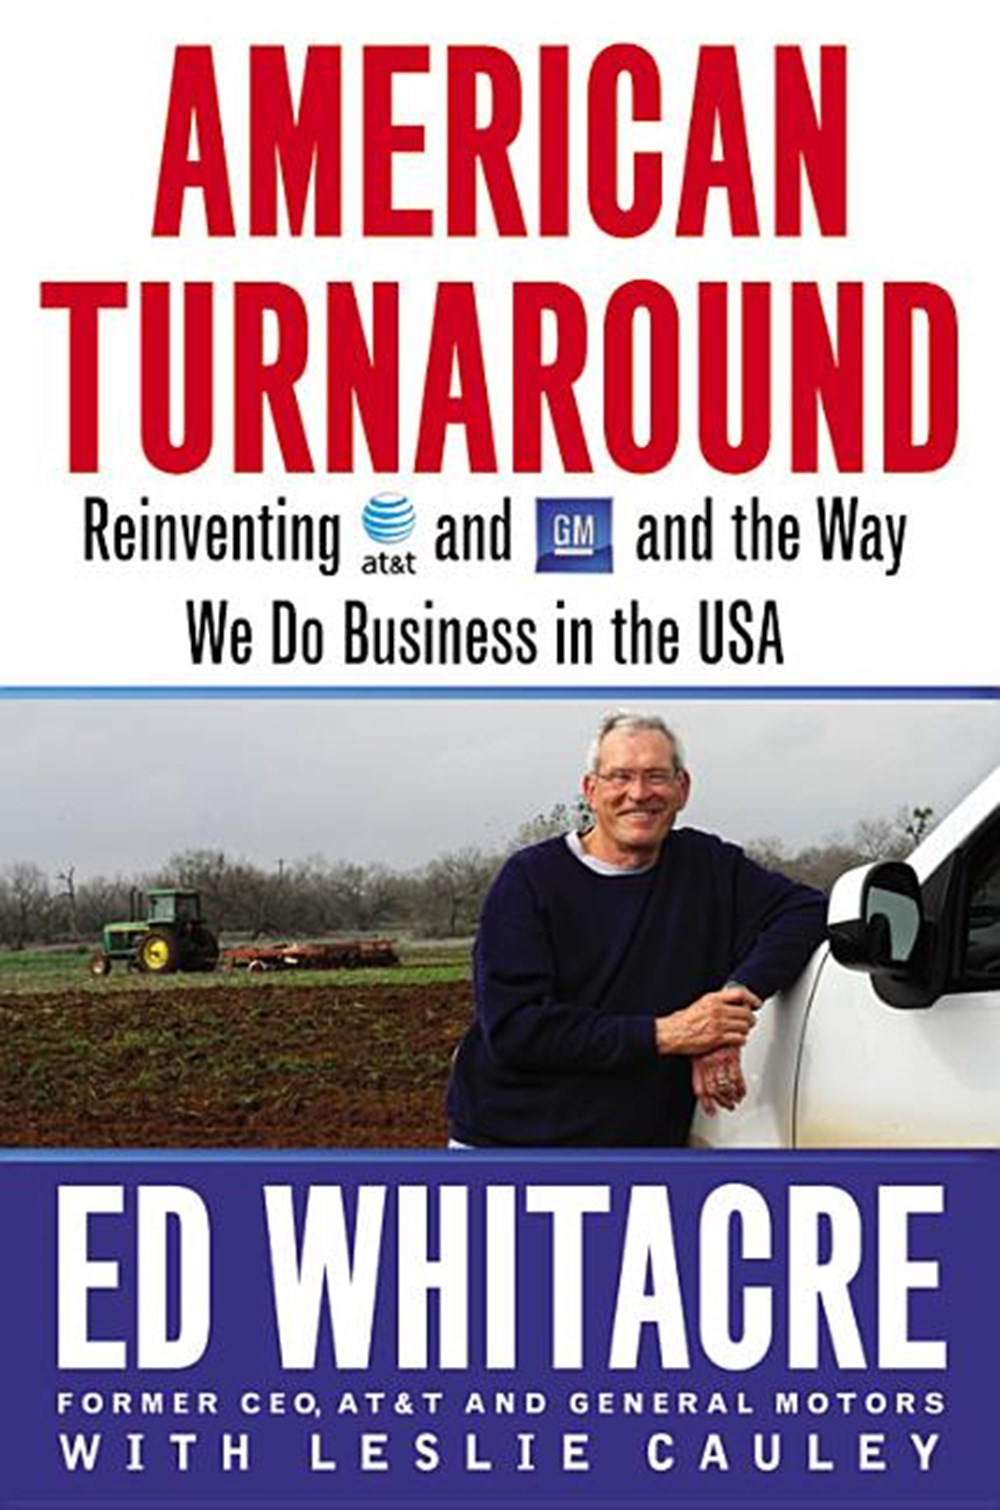 American Turnaround Reinventing AT&T and GM and the Way We Do Business in the USA